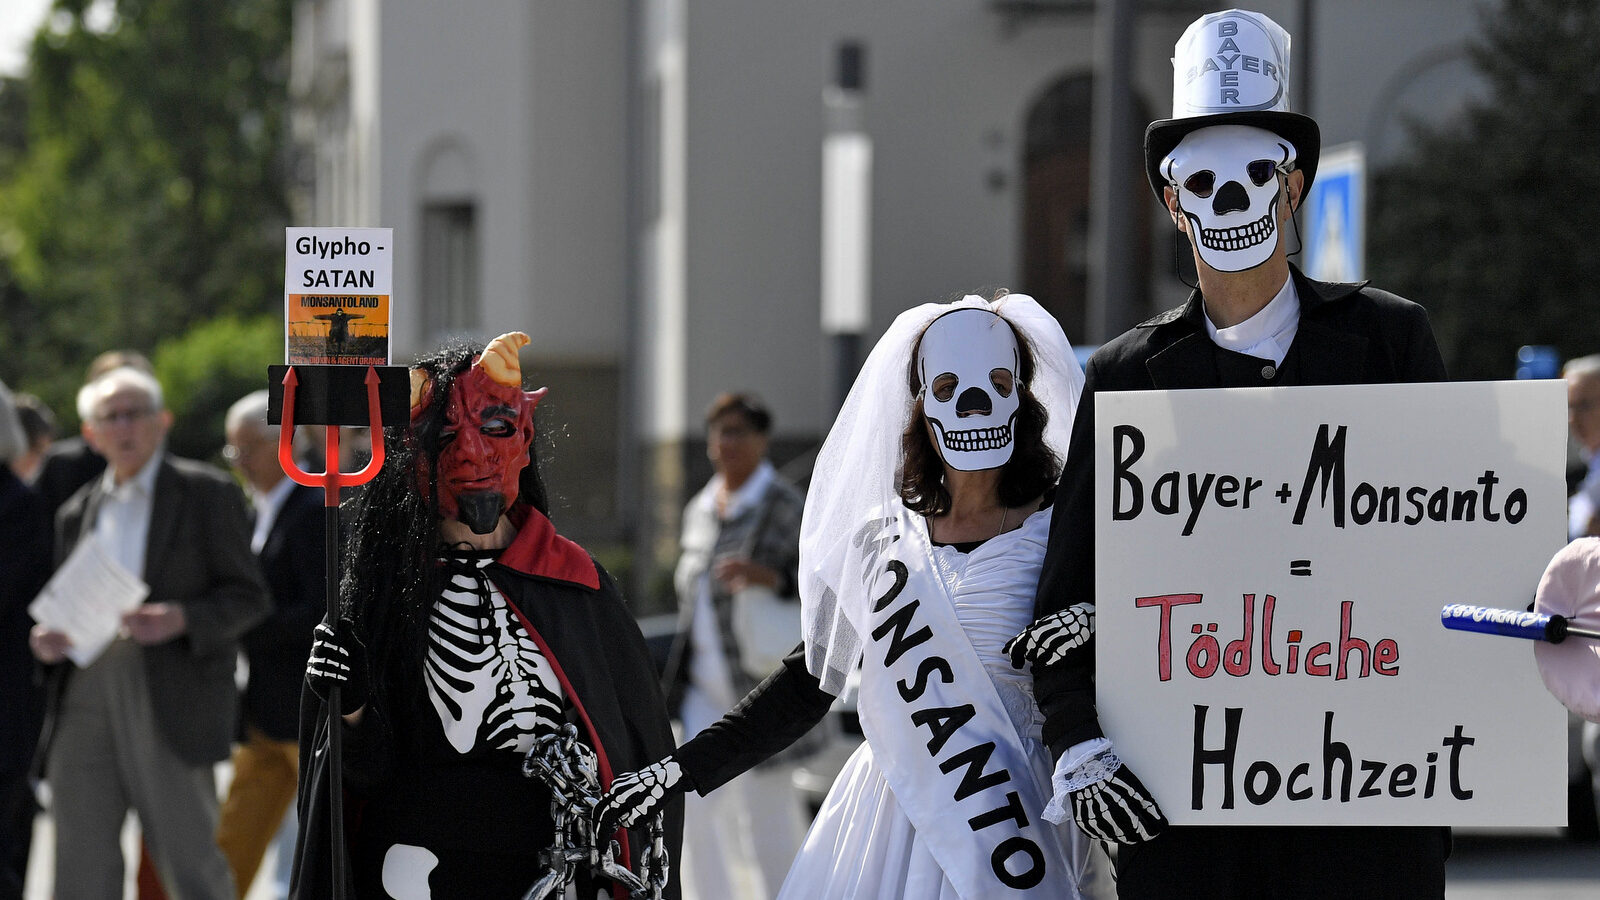 Activists protest against the acquisition of the US agrochemical company Monsanto by the German Bayer company outside the annual shareholders meeting of Bayer in Bonn, Germany, Friday, May 25, 2018. (AP Photo/Martin Meissner)